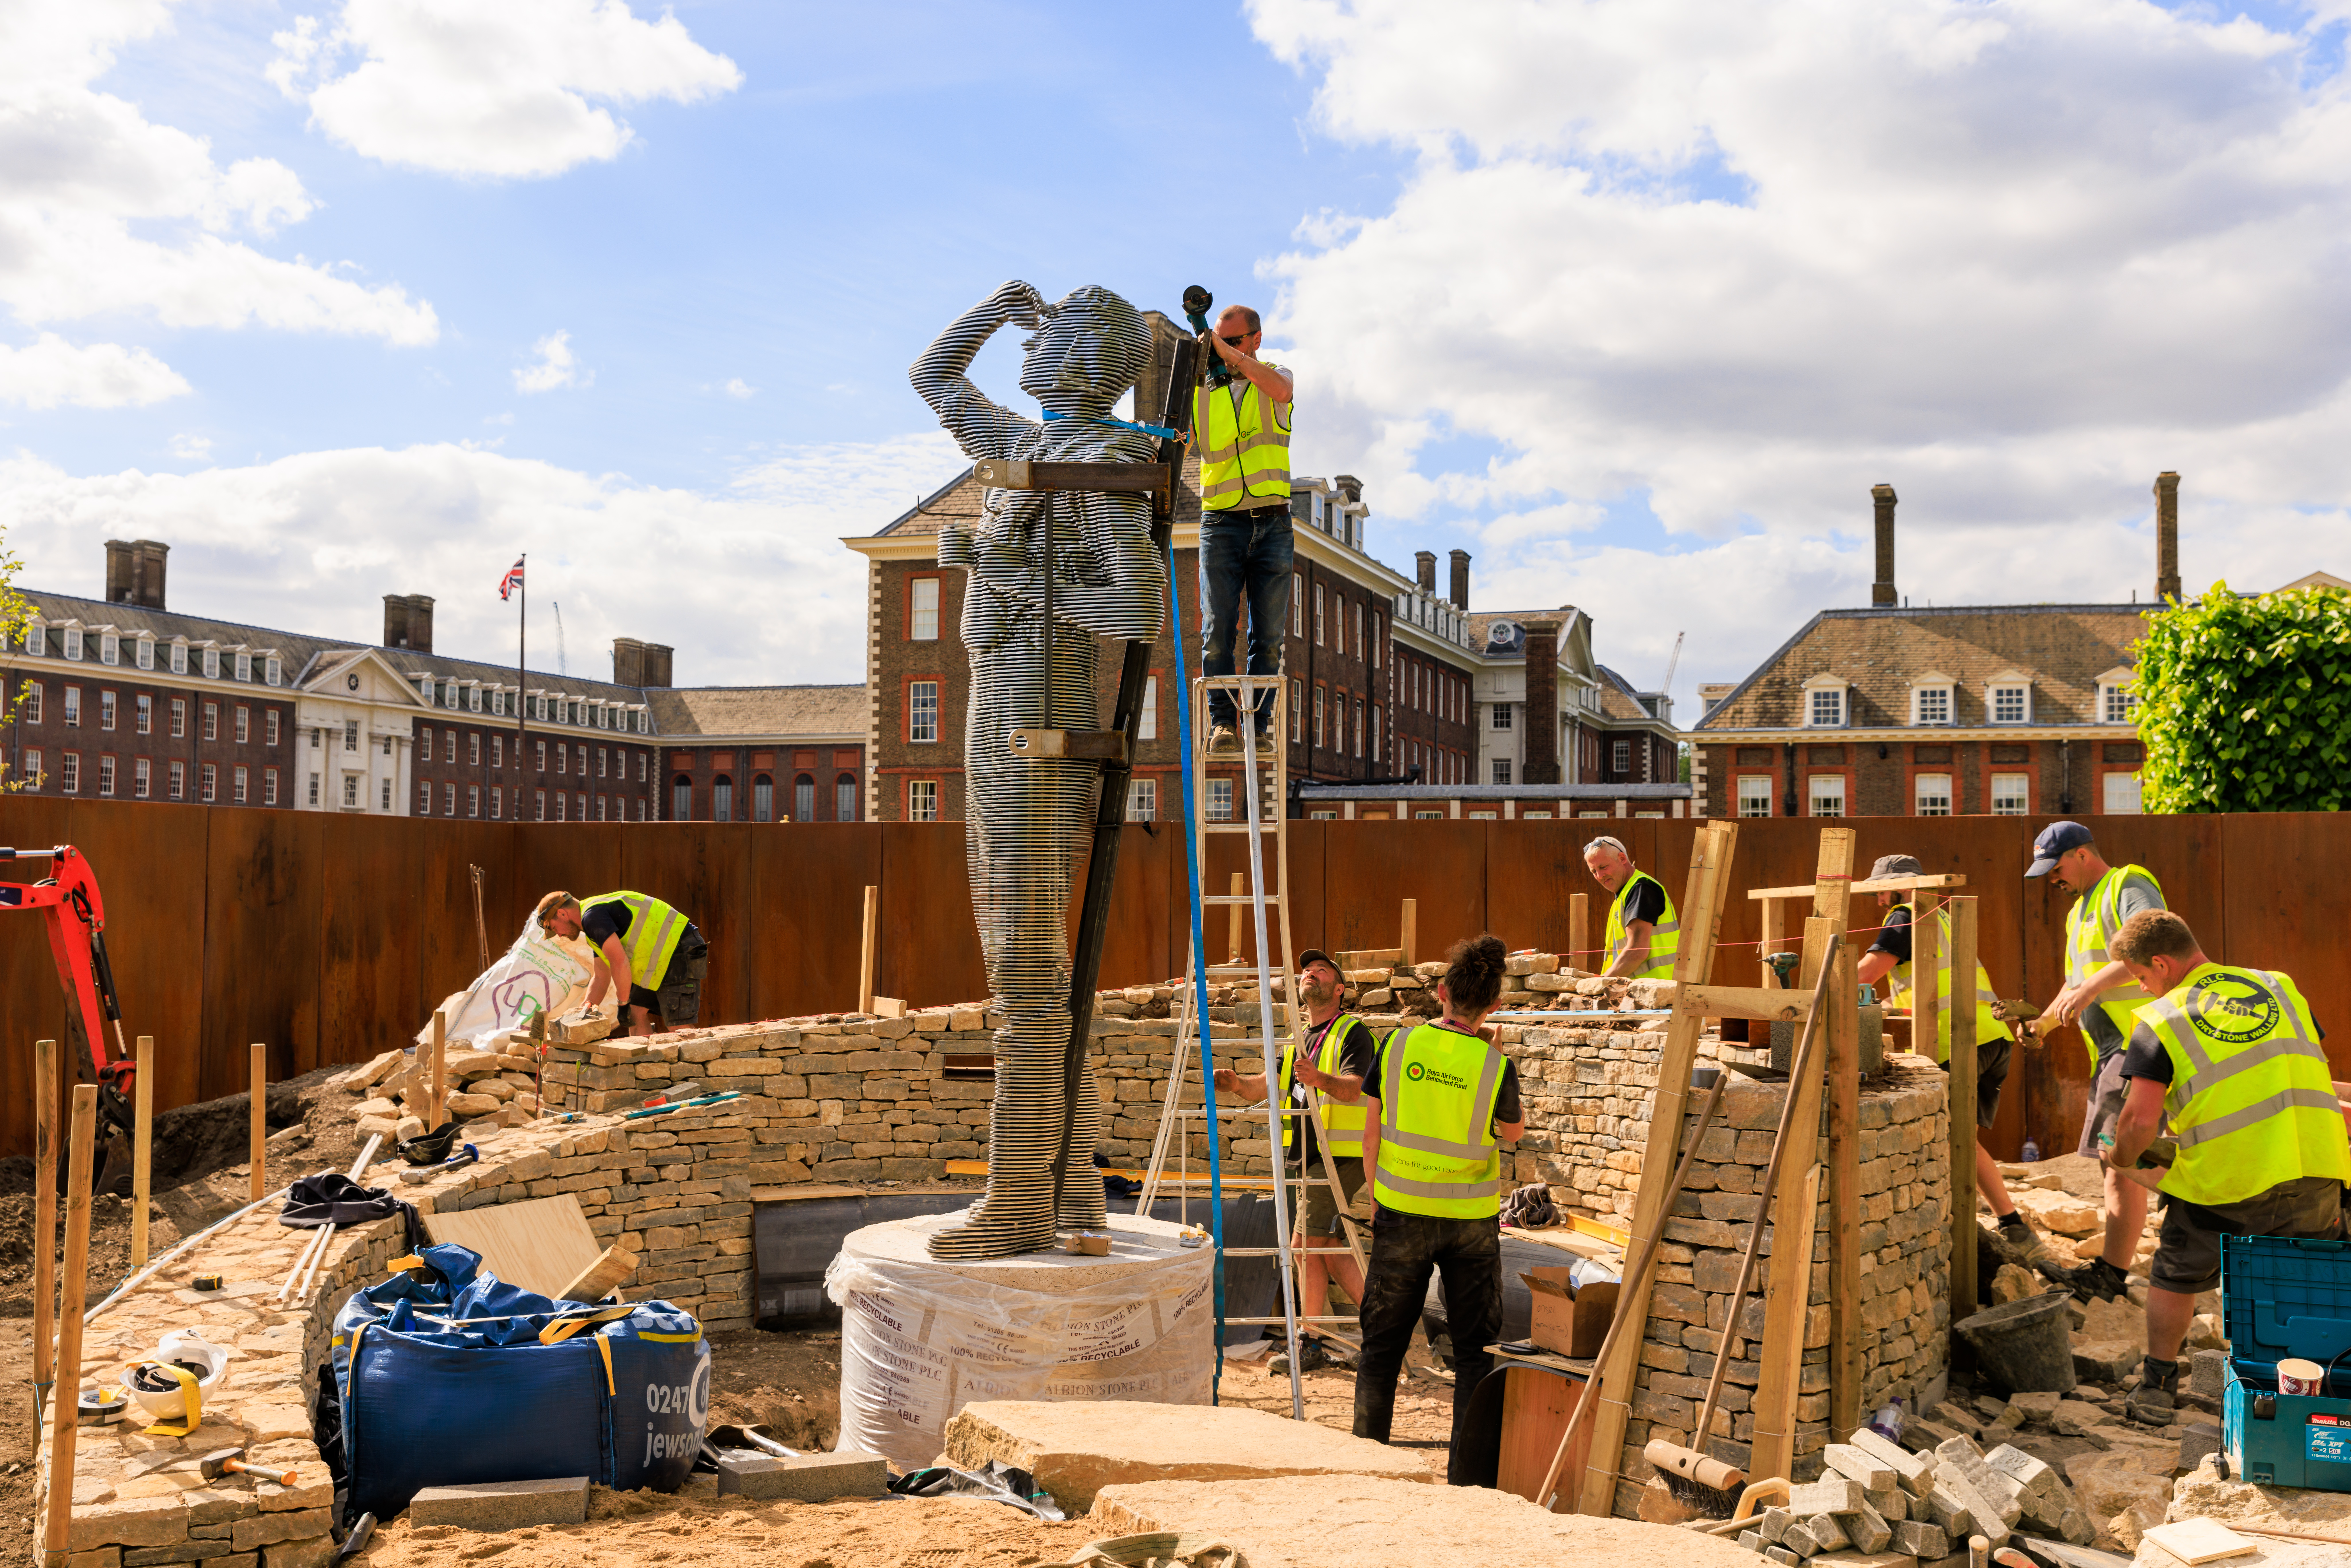 Sculpture on building site with workers.